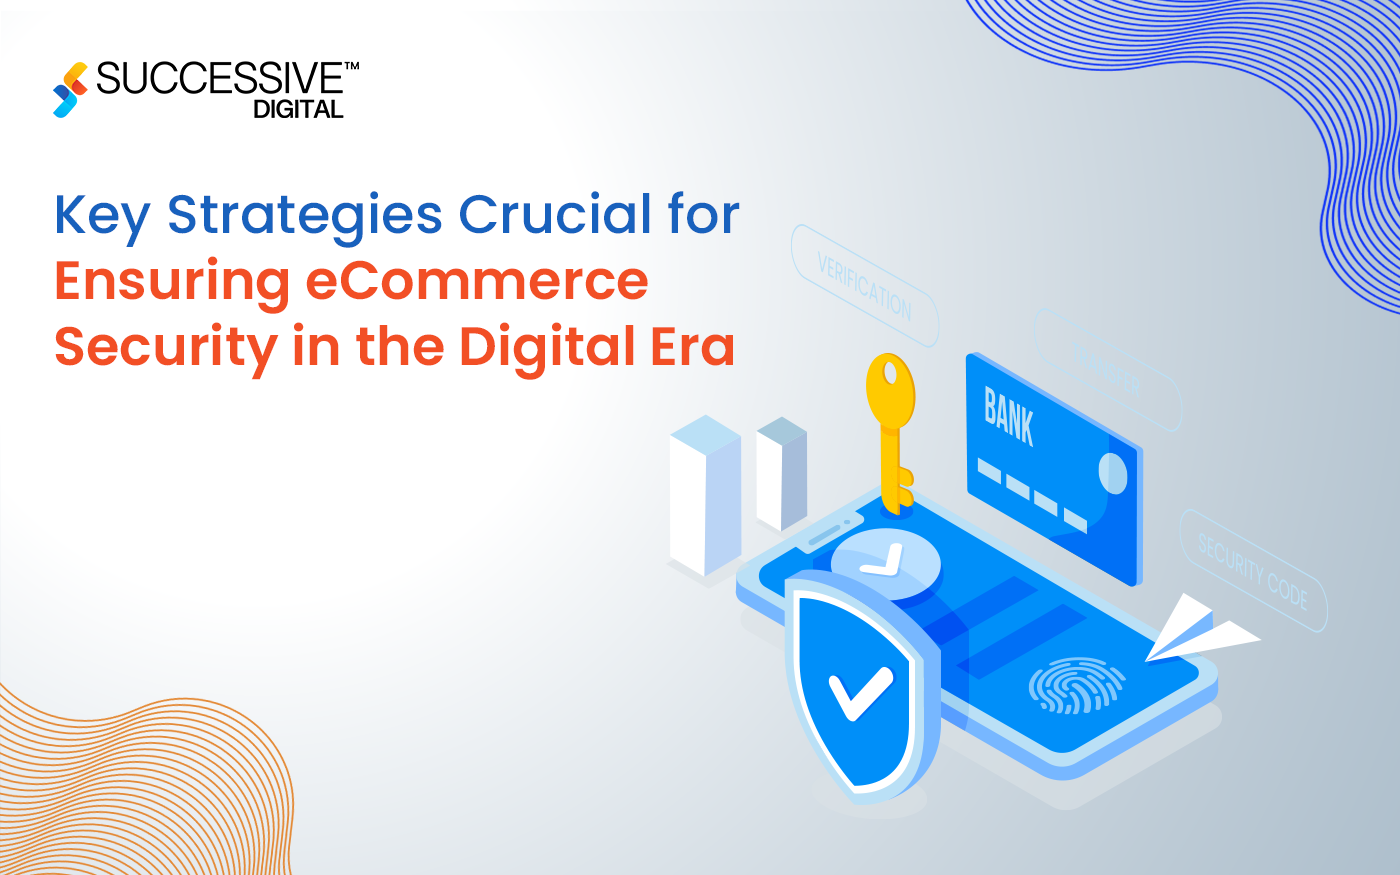 What Strategies Are Crucial for Ensuring eCommerce Security in the Digital Era?